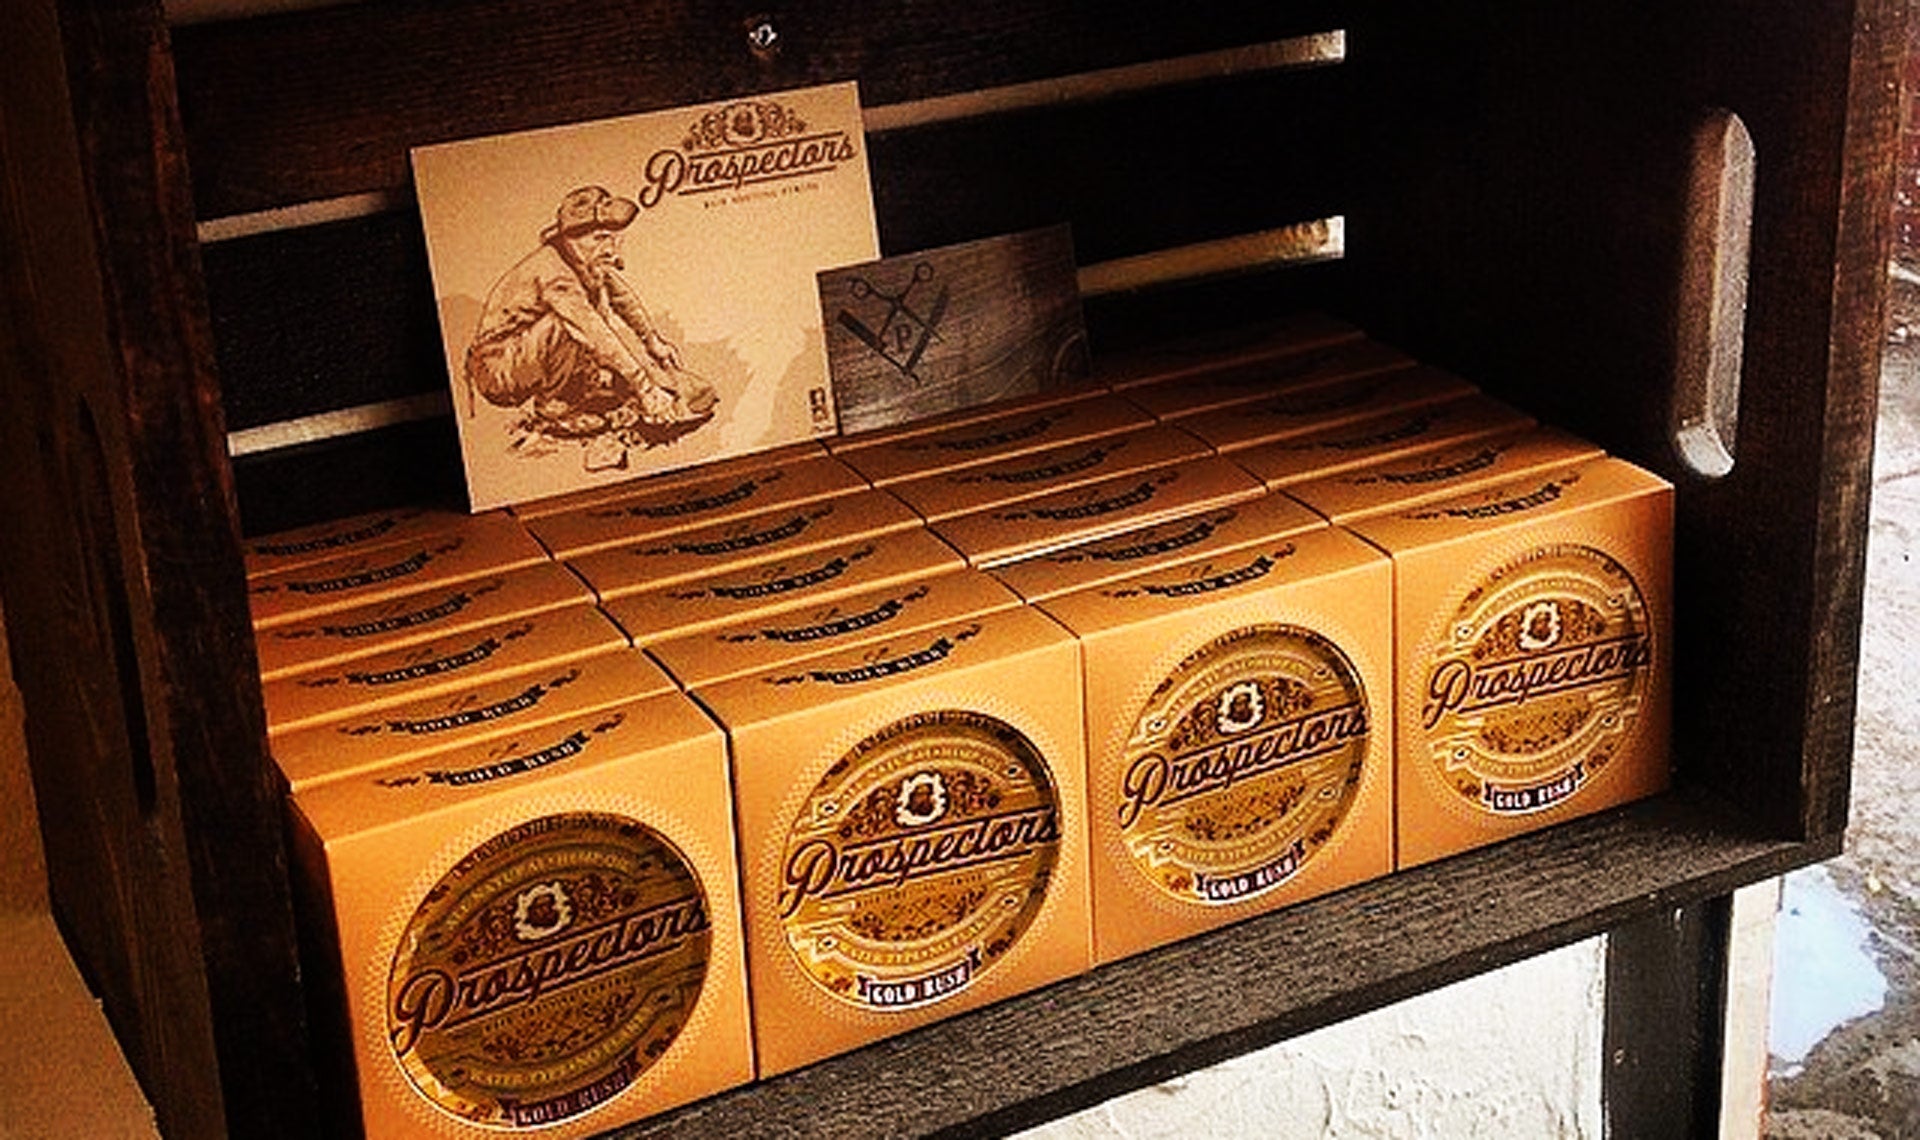 Prospectors Gold Rush Pomade displayed at Pipers Parlor Barbershop